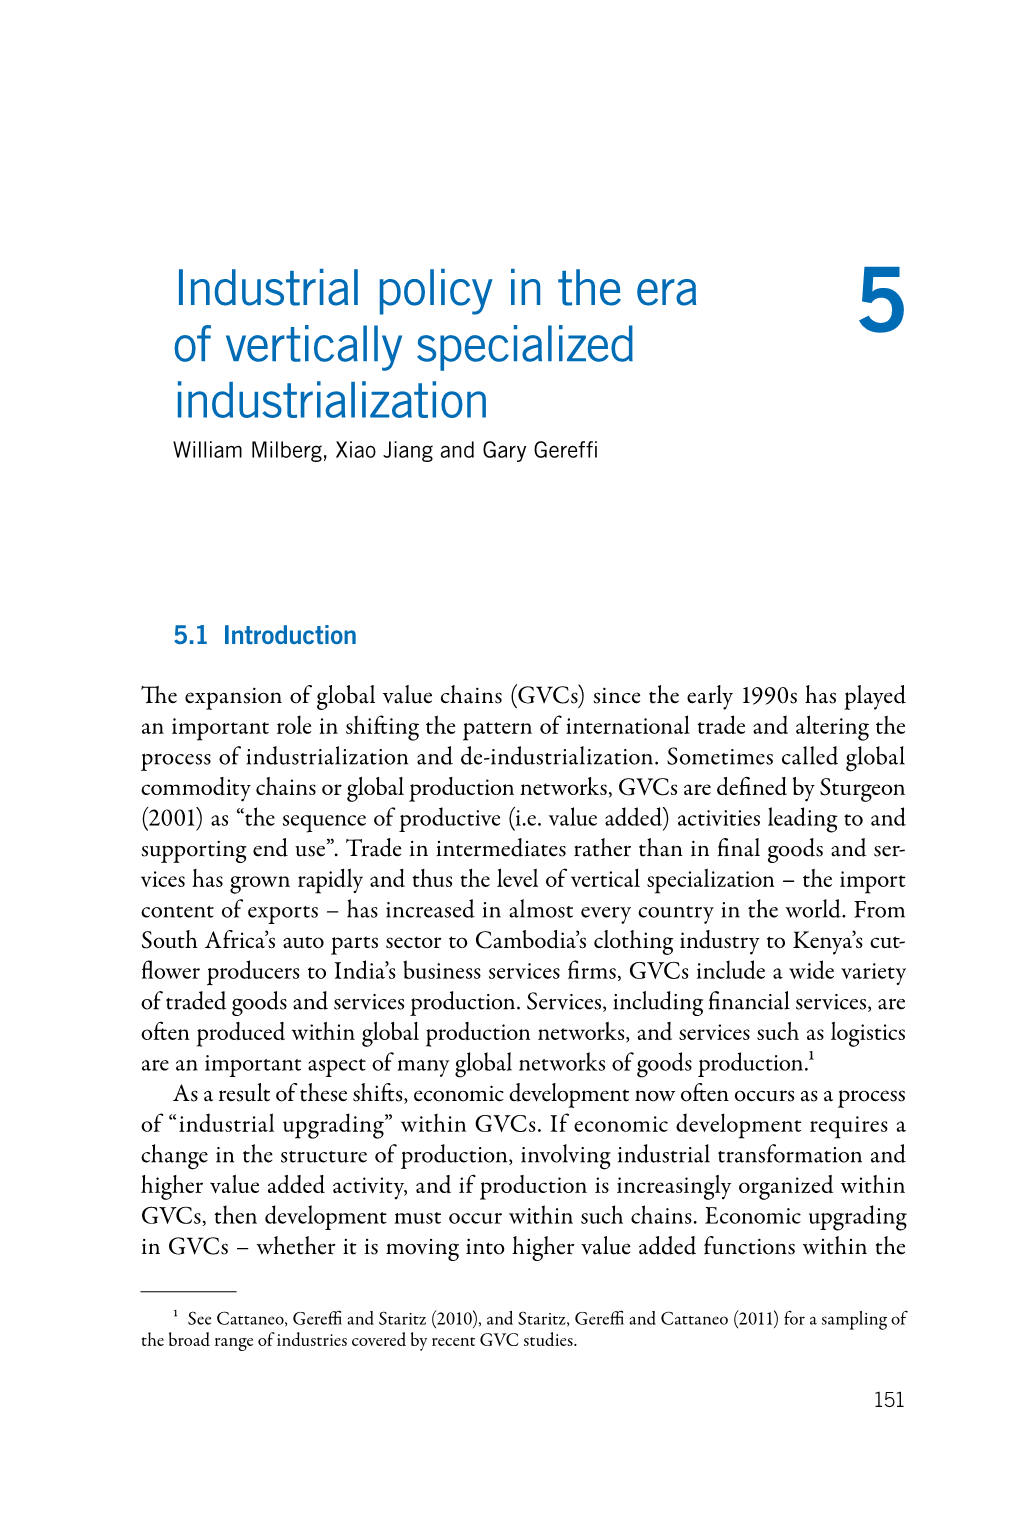 Industrial Policy in the Era of Vertically Specialized Industrialization Involved